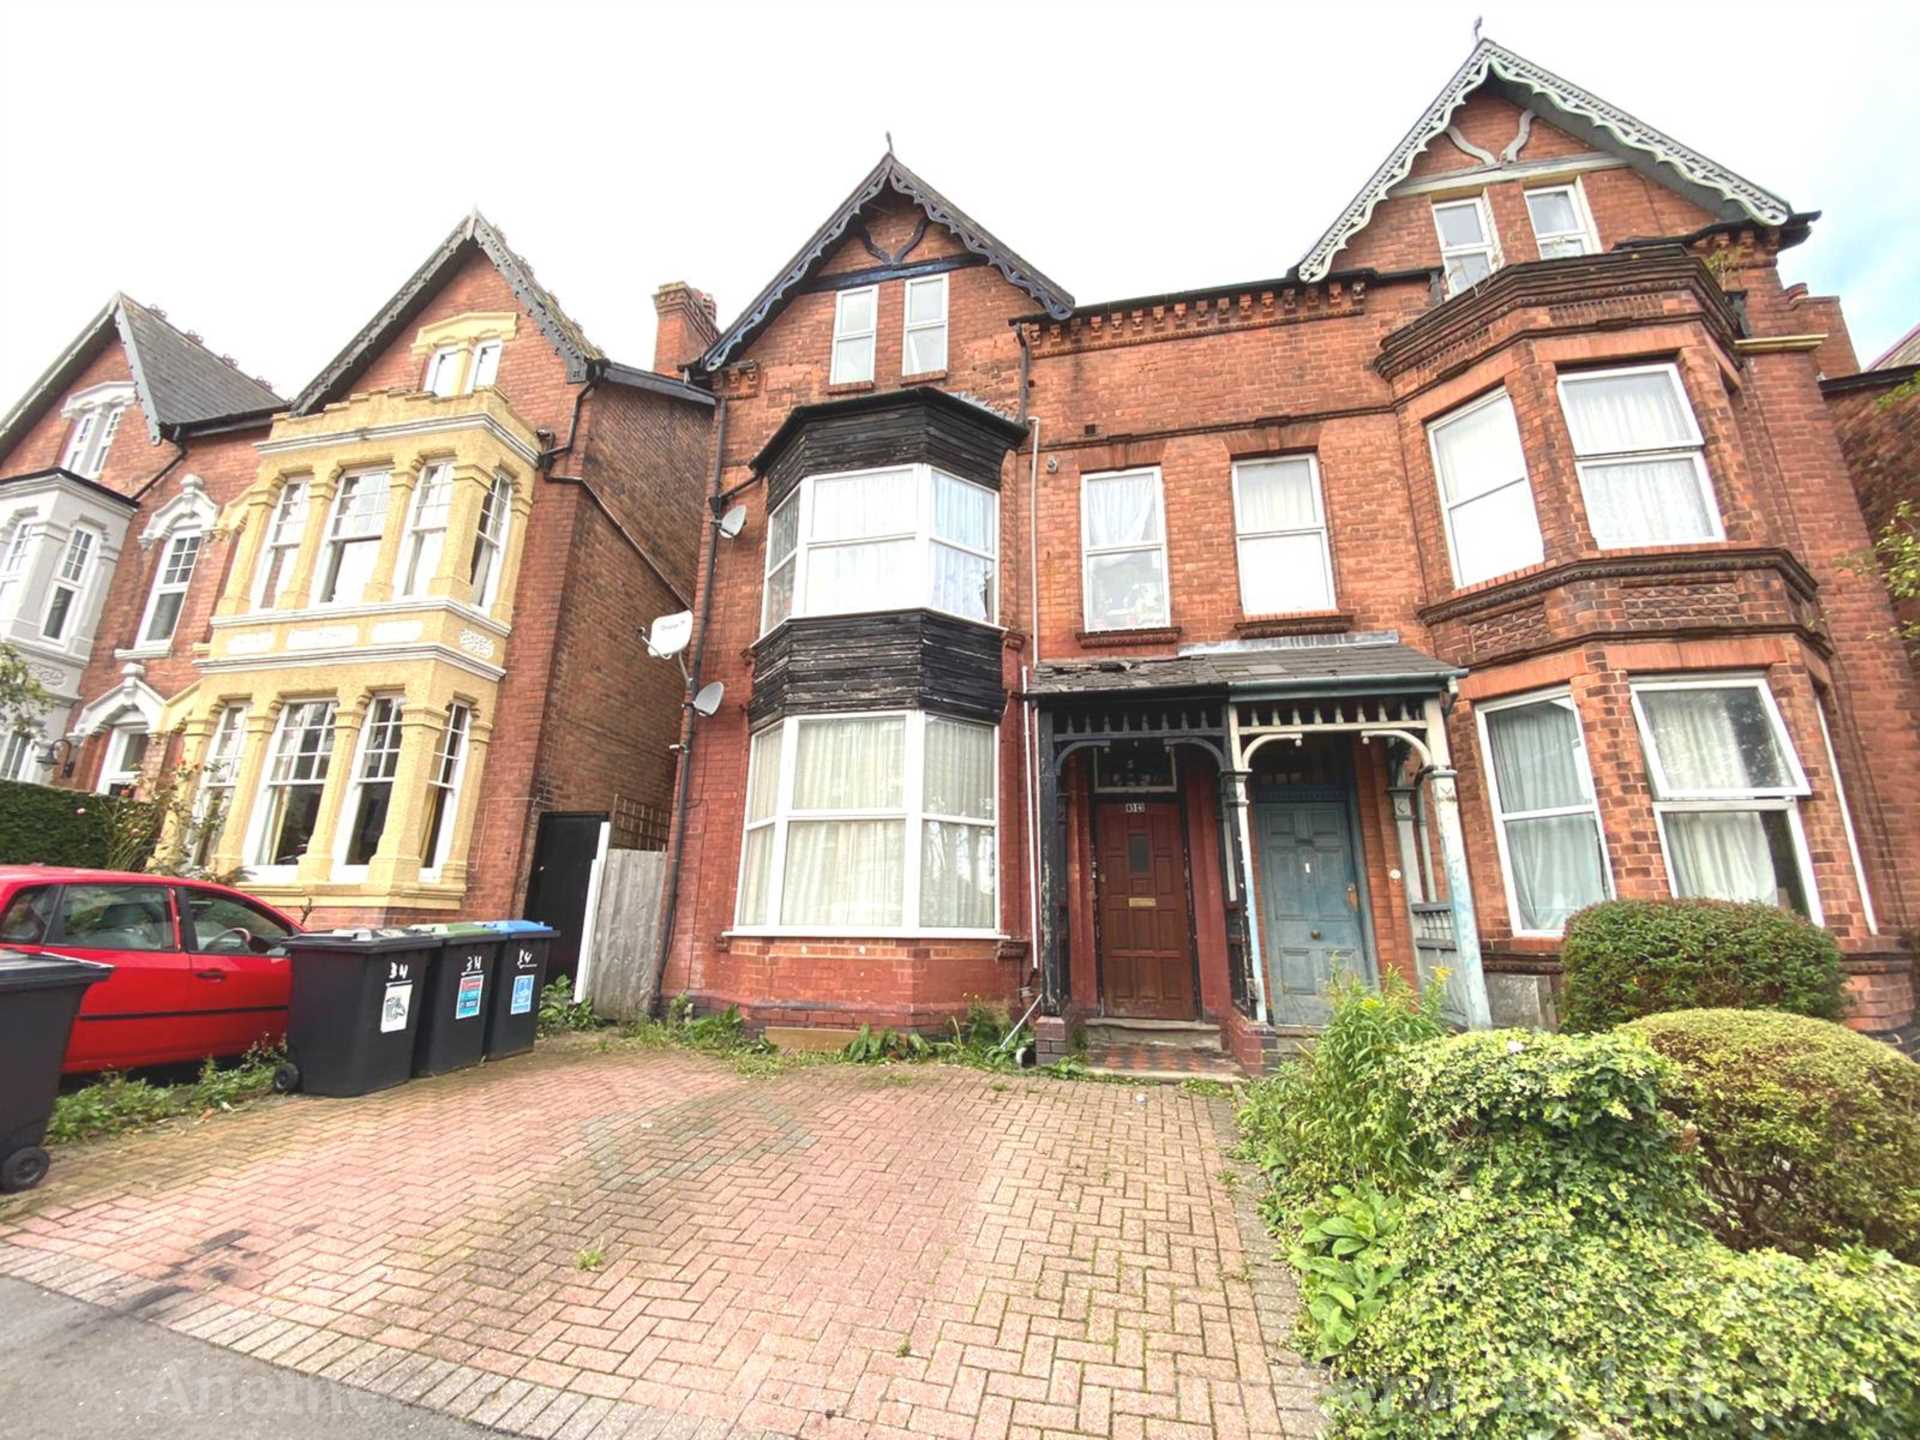 2 bed Flat for rent in Birmingham. From A1 Letting Services